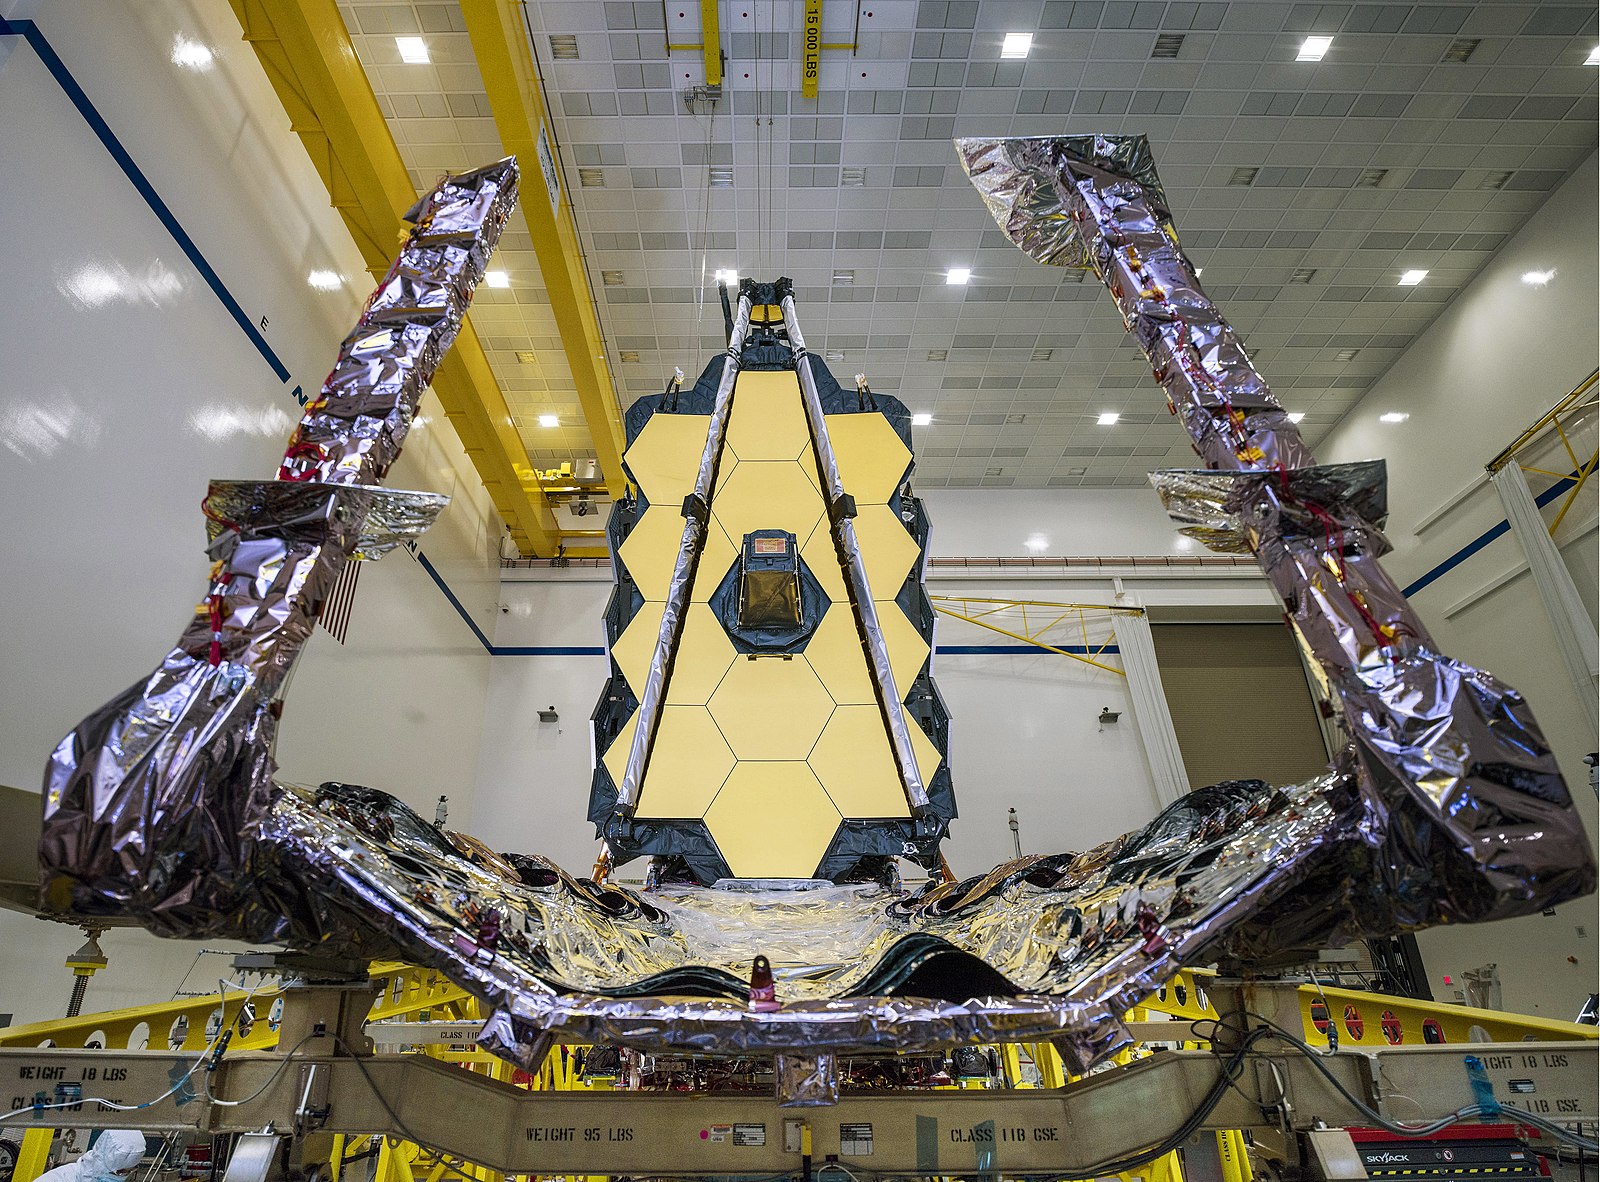 The most powerful and complex space telescope created by humankind, as photographed during assembly in TKYEAR, has been launched into space. We now wait for data to be processed and analyzed. [Credit: NASA | (license)]